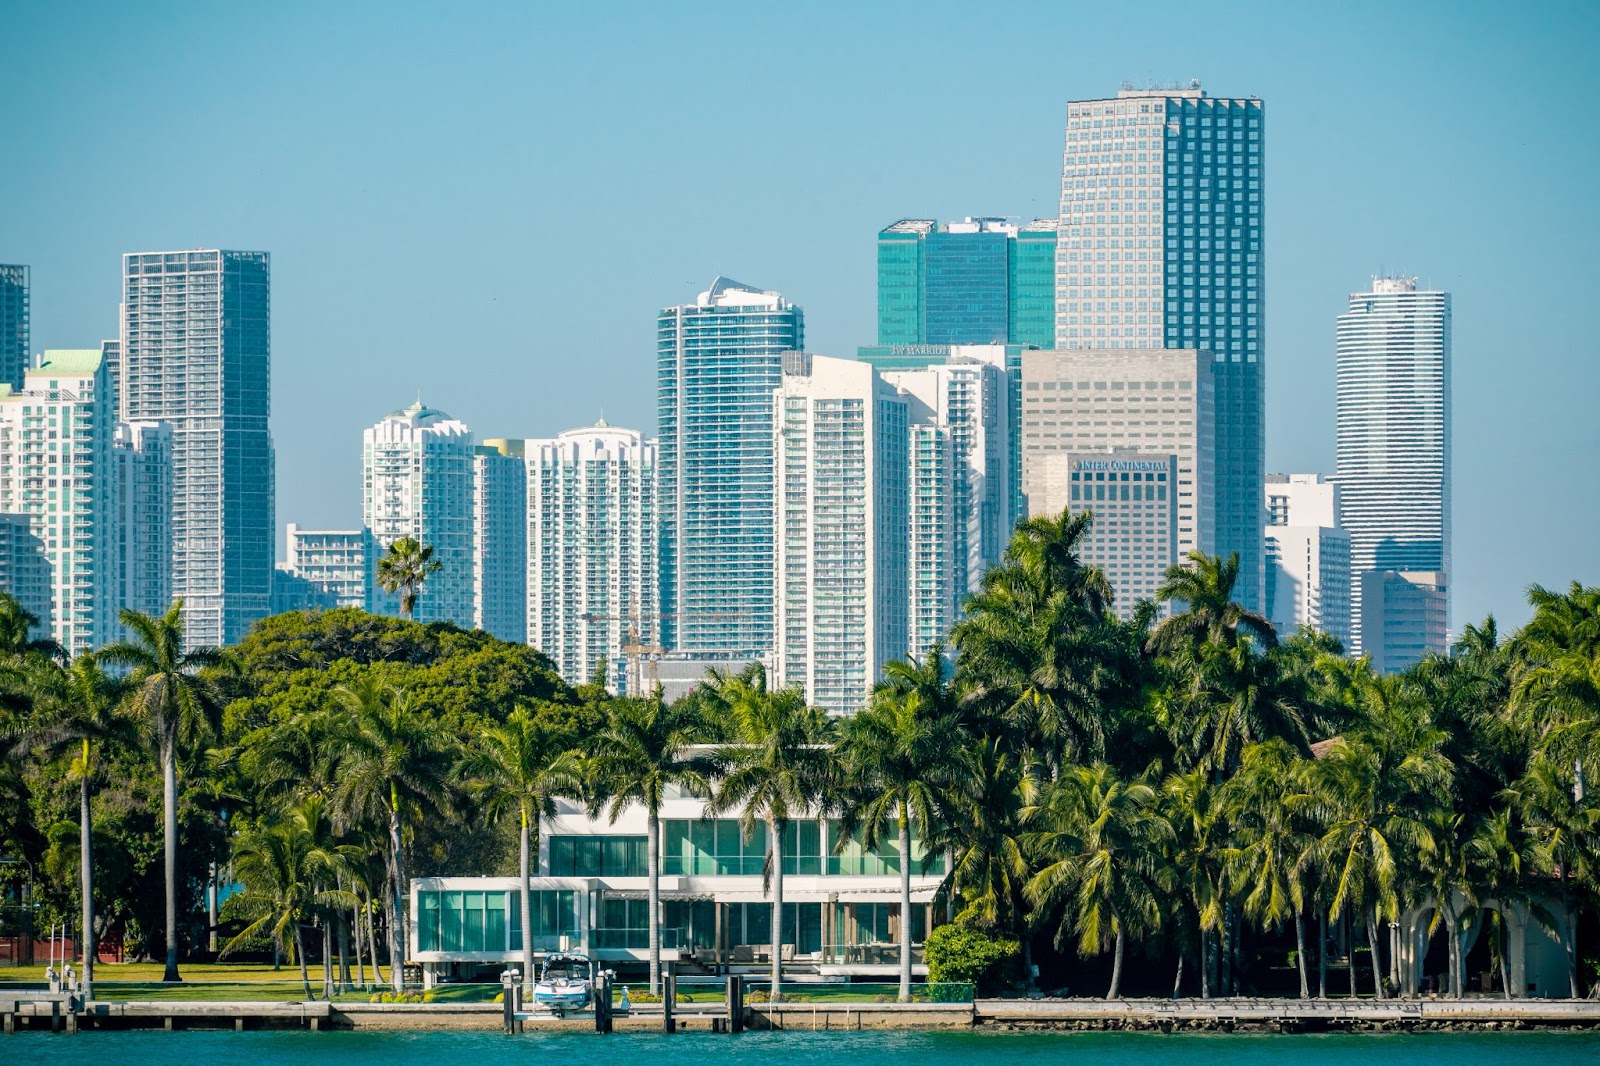 Skyline view of the city of Miami Florida